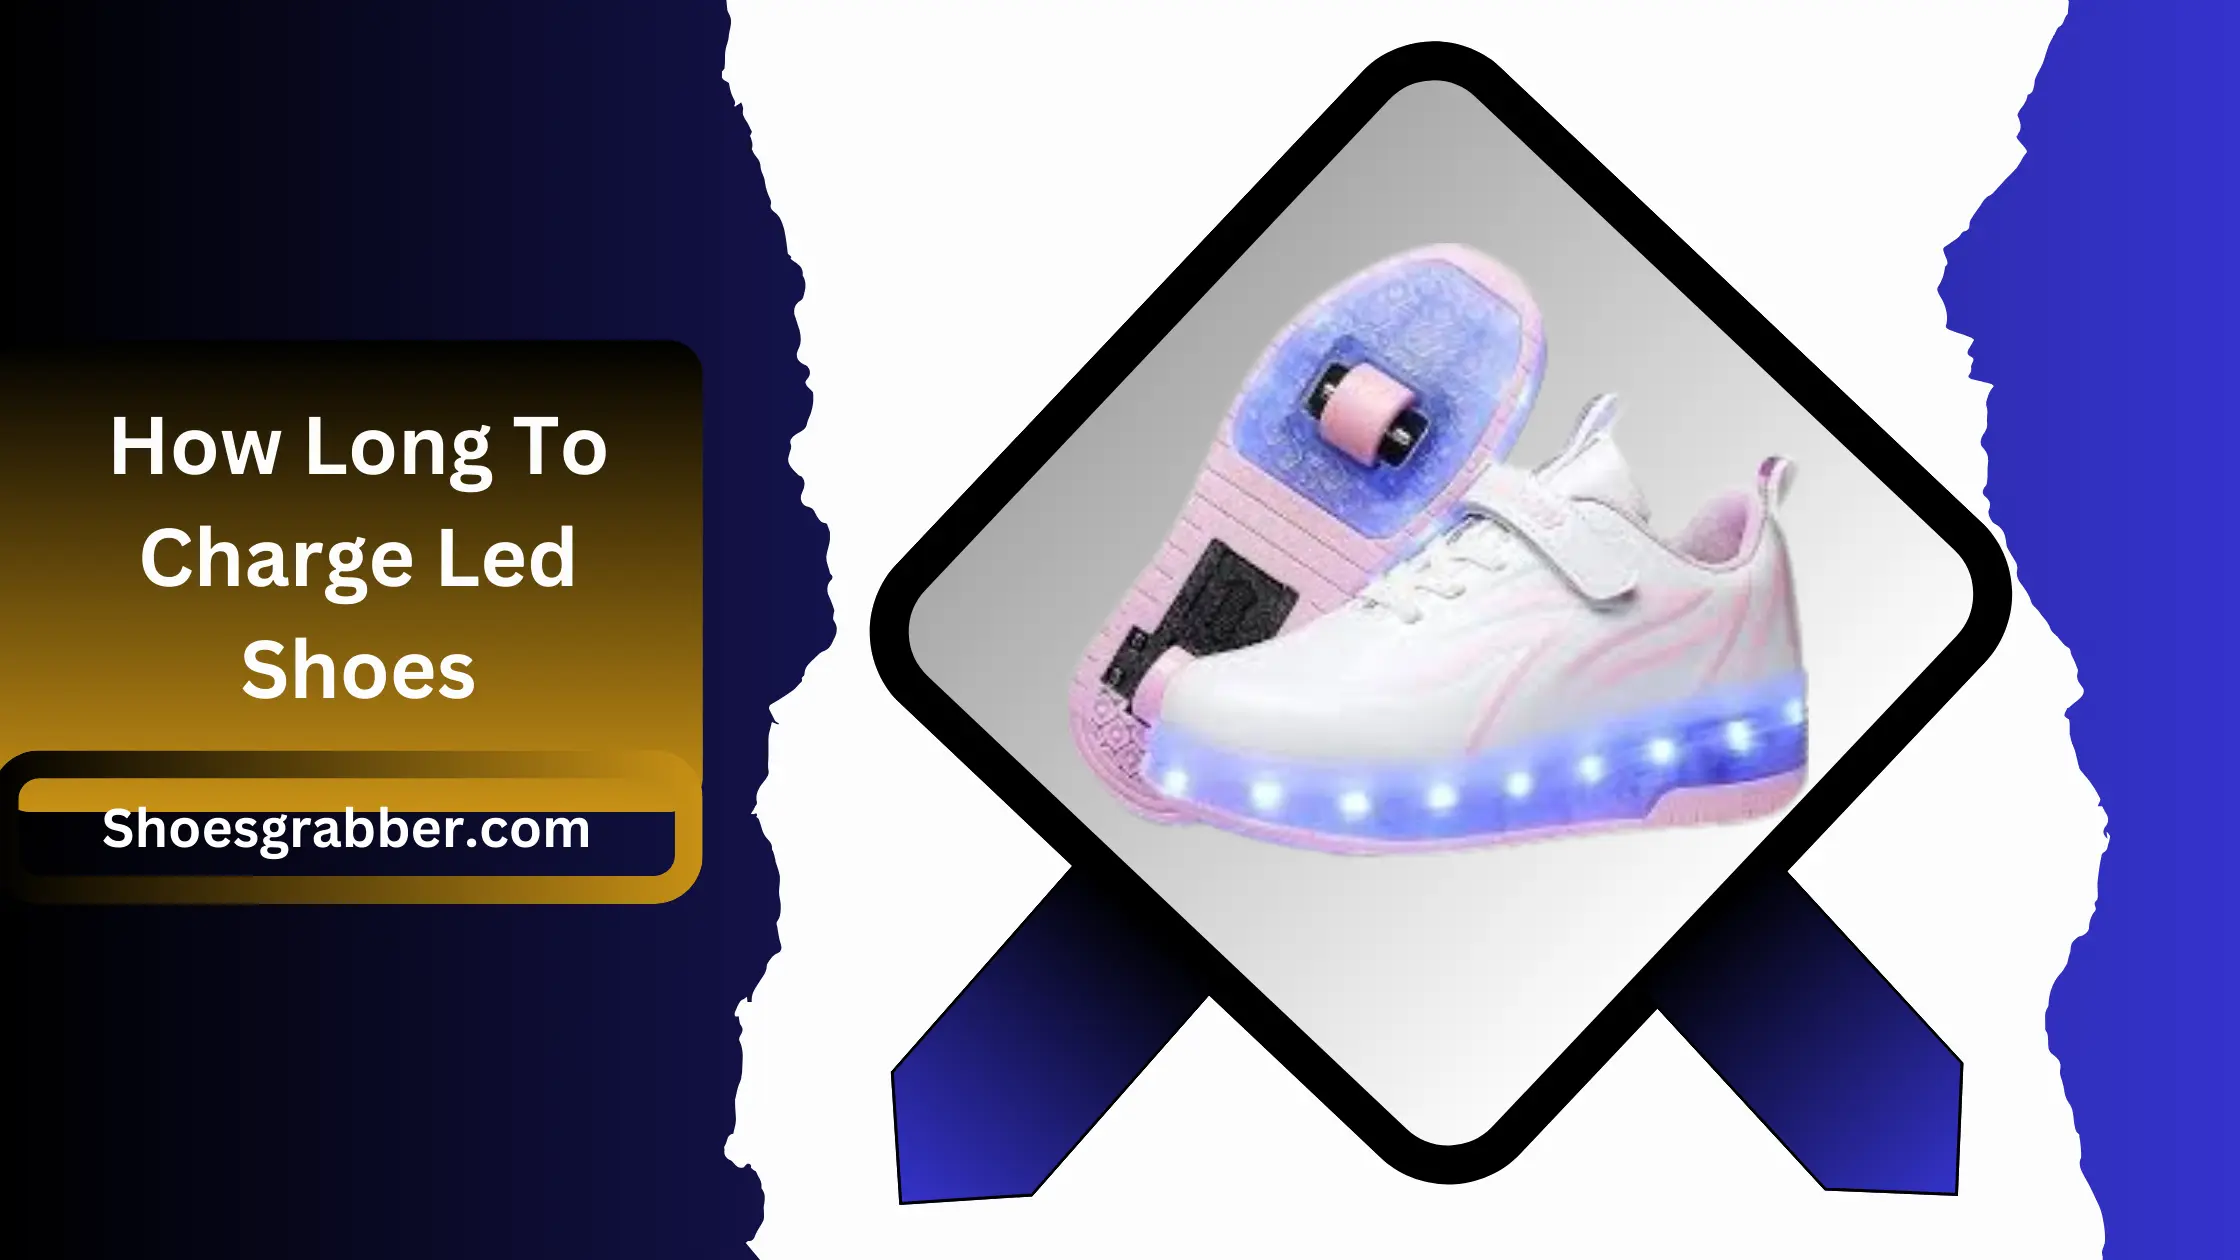 How Long To Charge Led Shoes - Light Up the Night